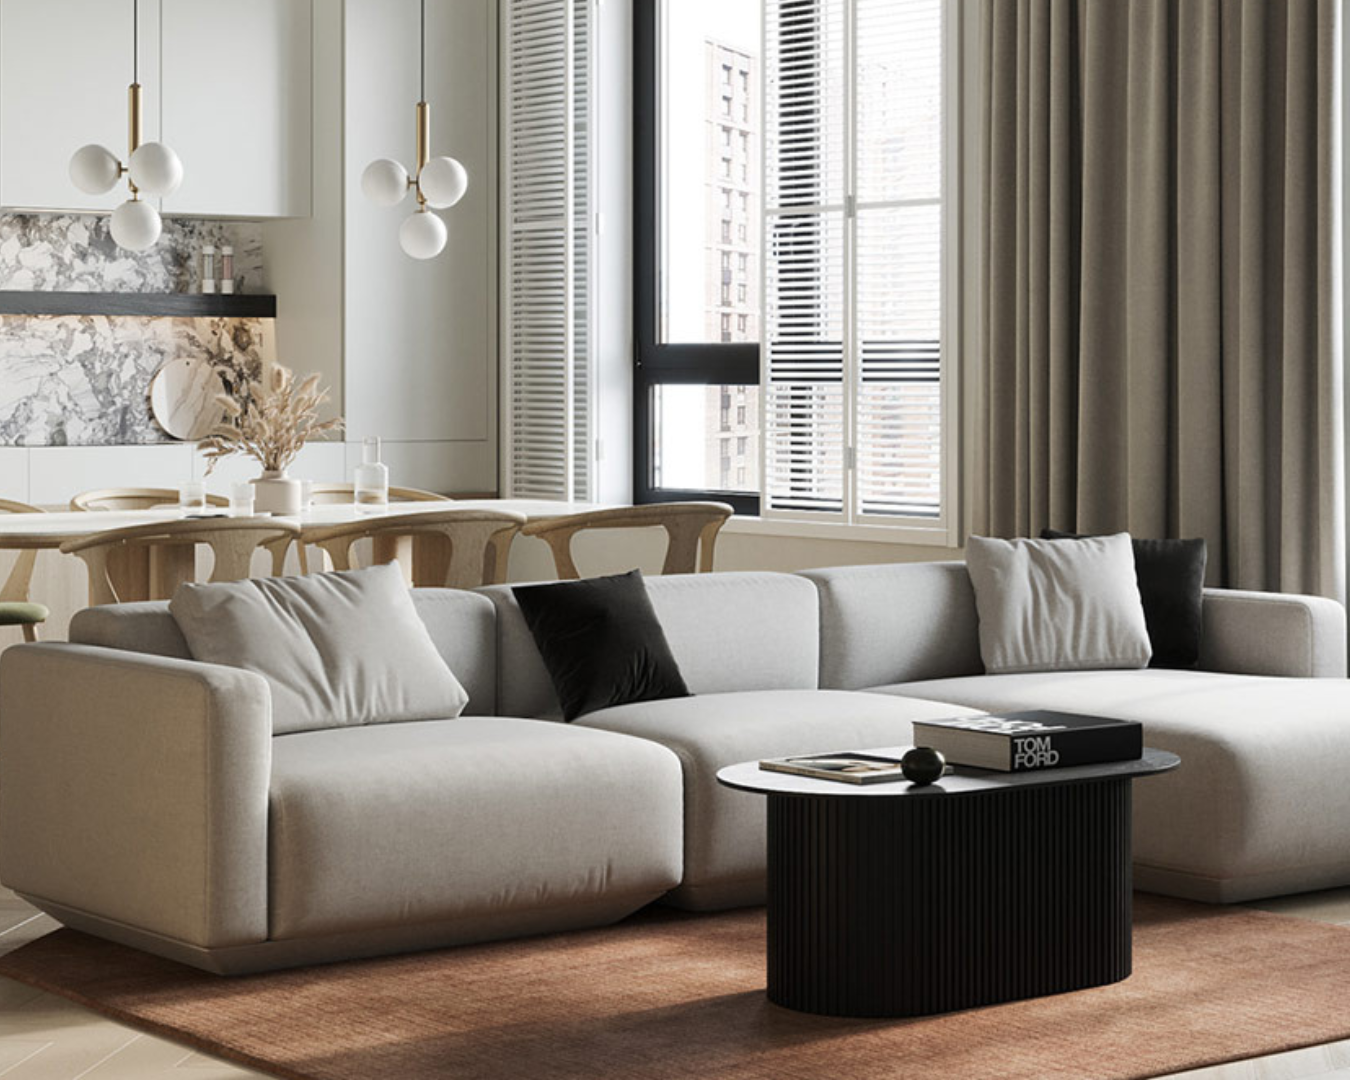 How to Choose the Perfect Sofa for Your Home